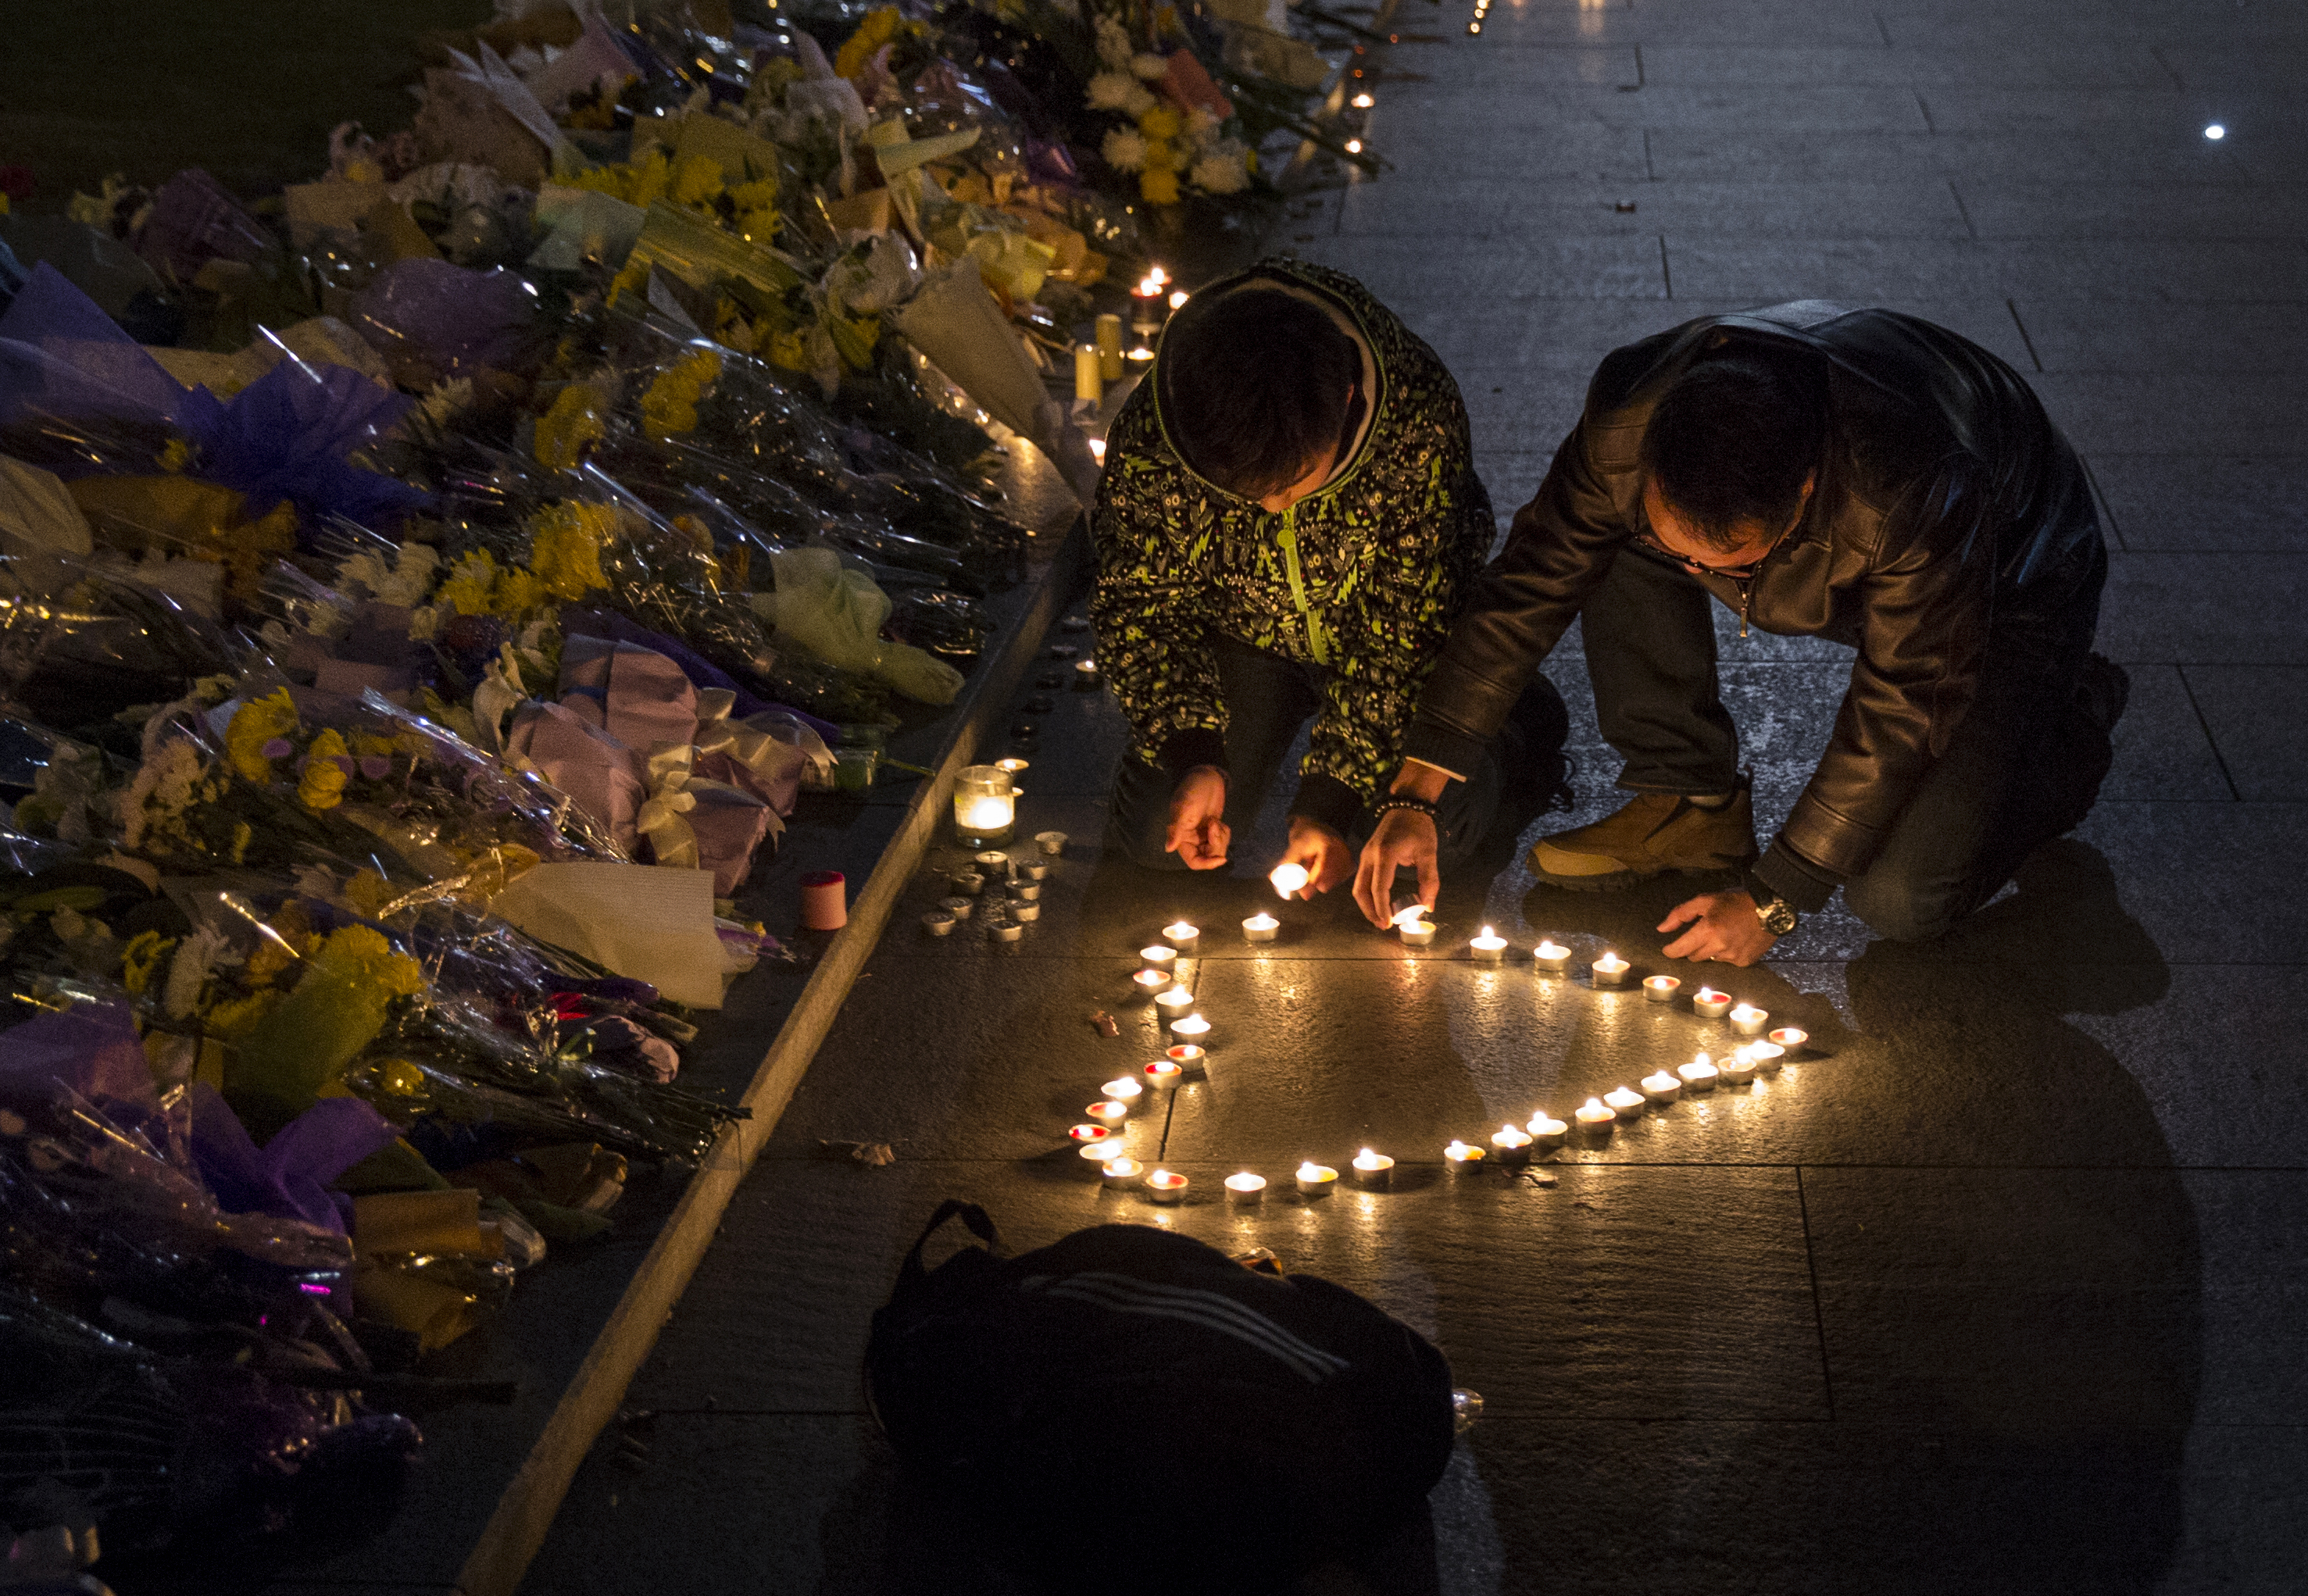 Mourners light candles in the shape of a heart at a makeshift memorial at the site of a stampede on January 1, 2015 on the Bund in Shanghai, China. More than 35 people died and dozens were injured during a stampede at a New Years eve celebration late December 31, 2014. (Kevin Frayer—Getty Images)